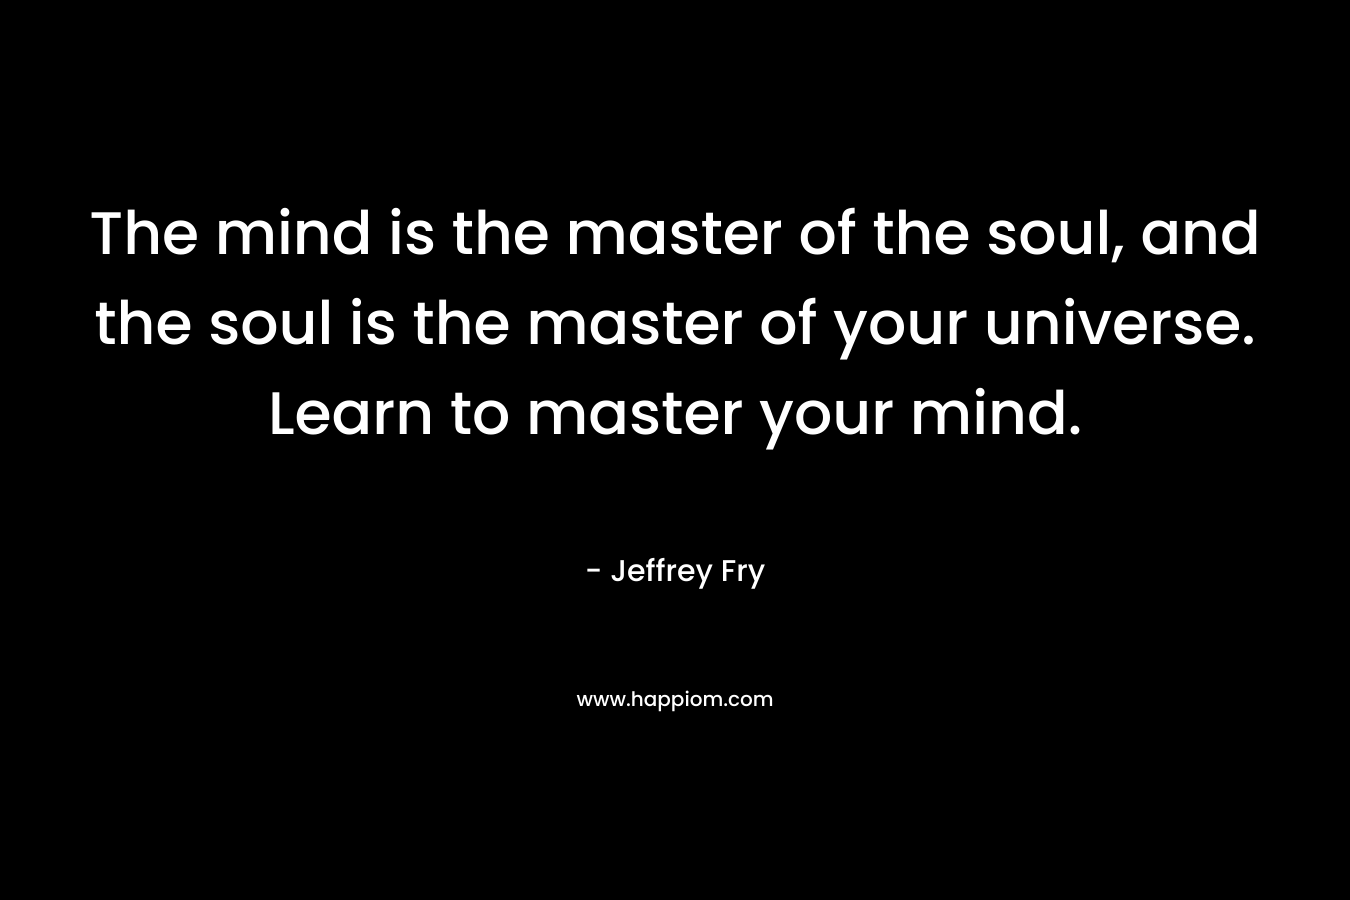 The mind is the master of the soul, and the soul is the master of your universe. Learn to master your mind.